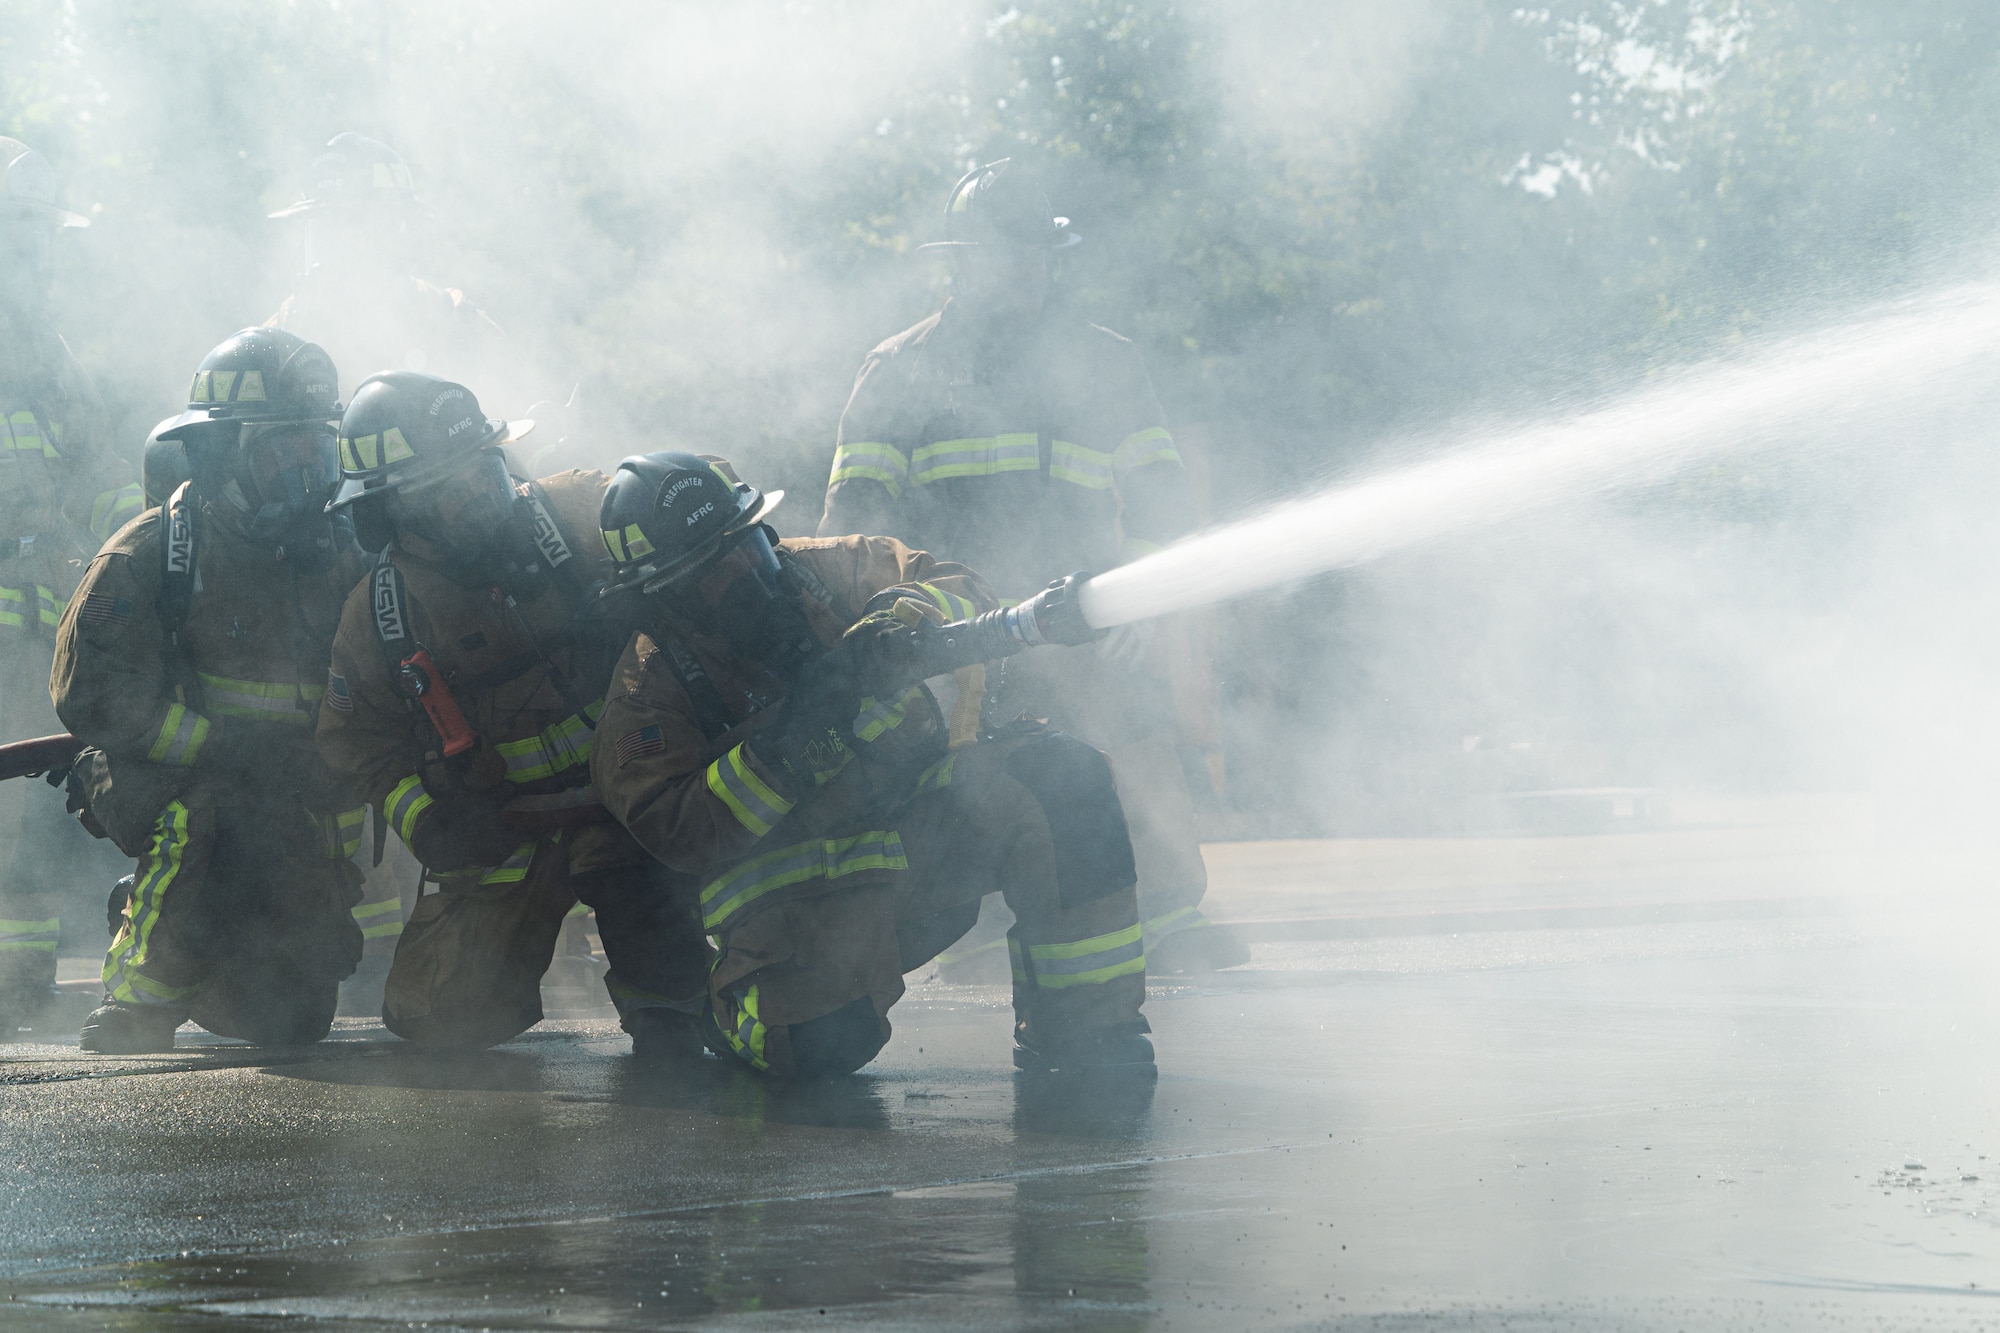 Firefighters with the 914th Fire Emergency Services kneel within a cloud of smoke while attempting to put out a simulated aircraft's fire during training.